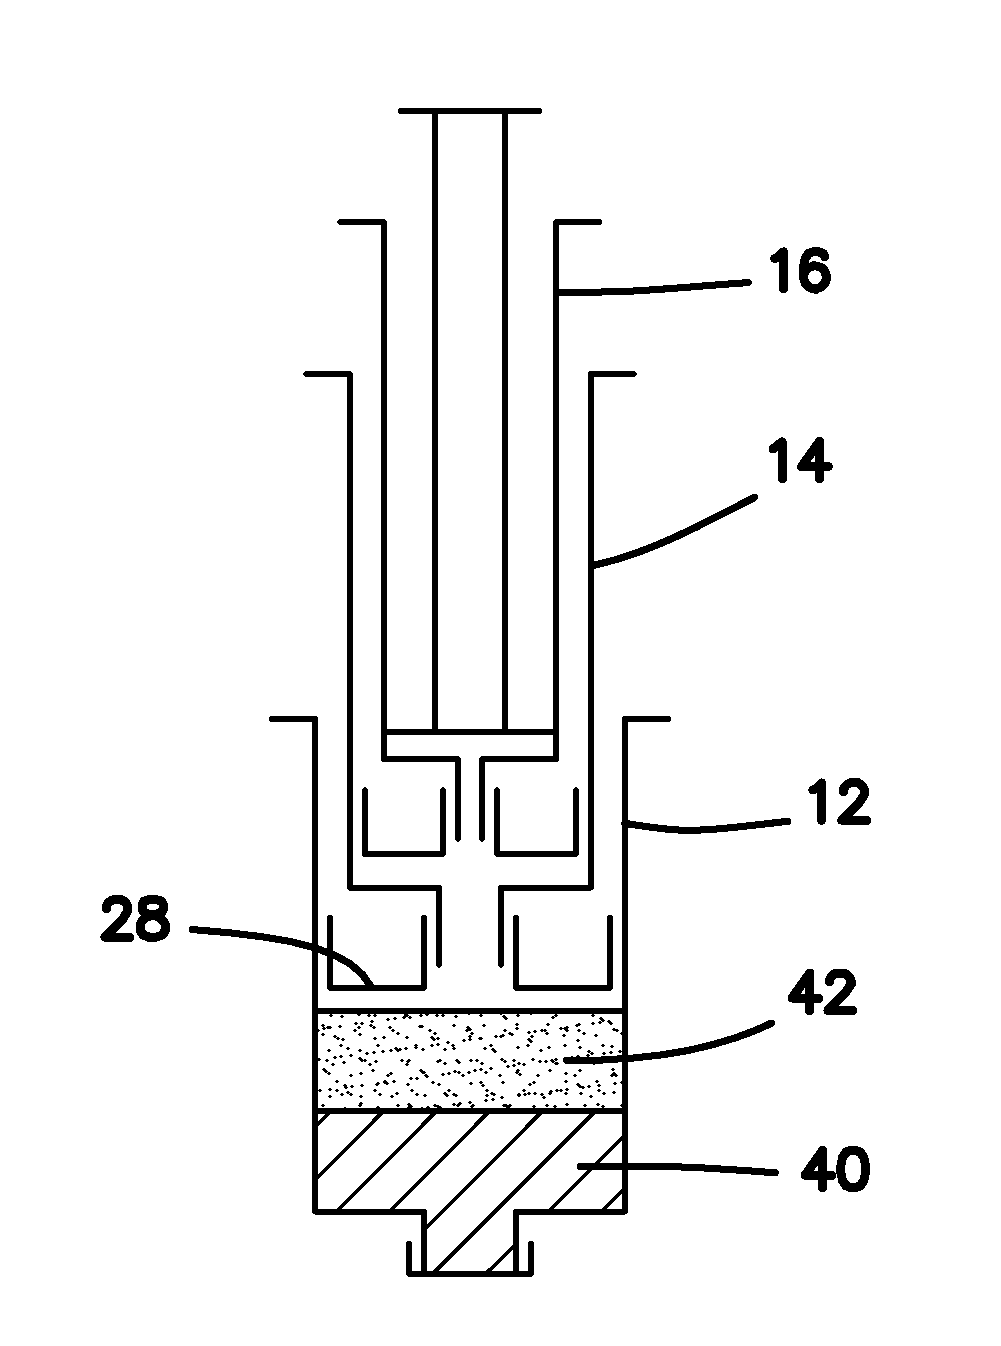 Method and Apparatus for Producing Platelet Rich Plasma